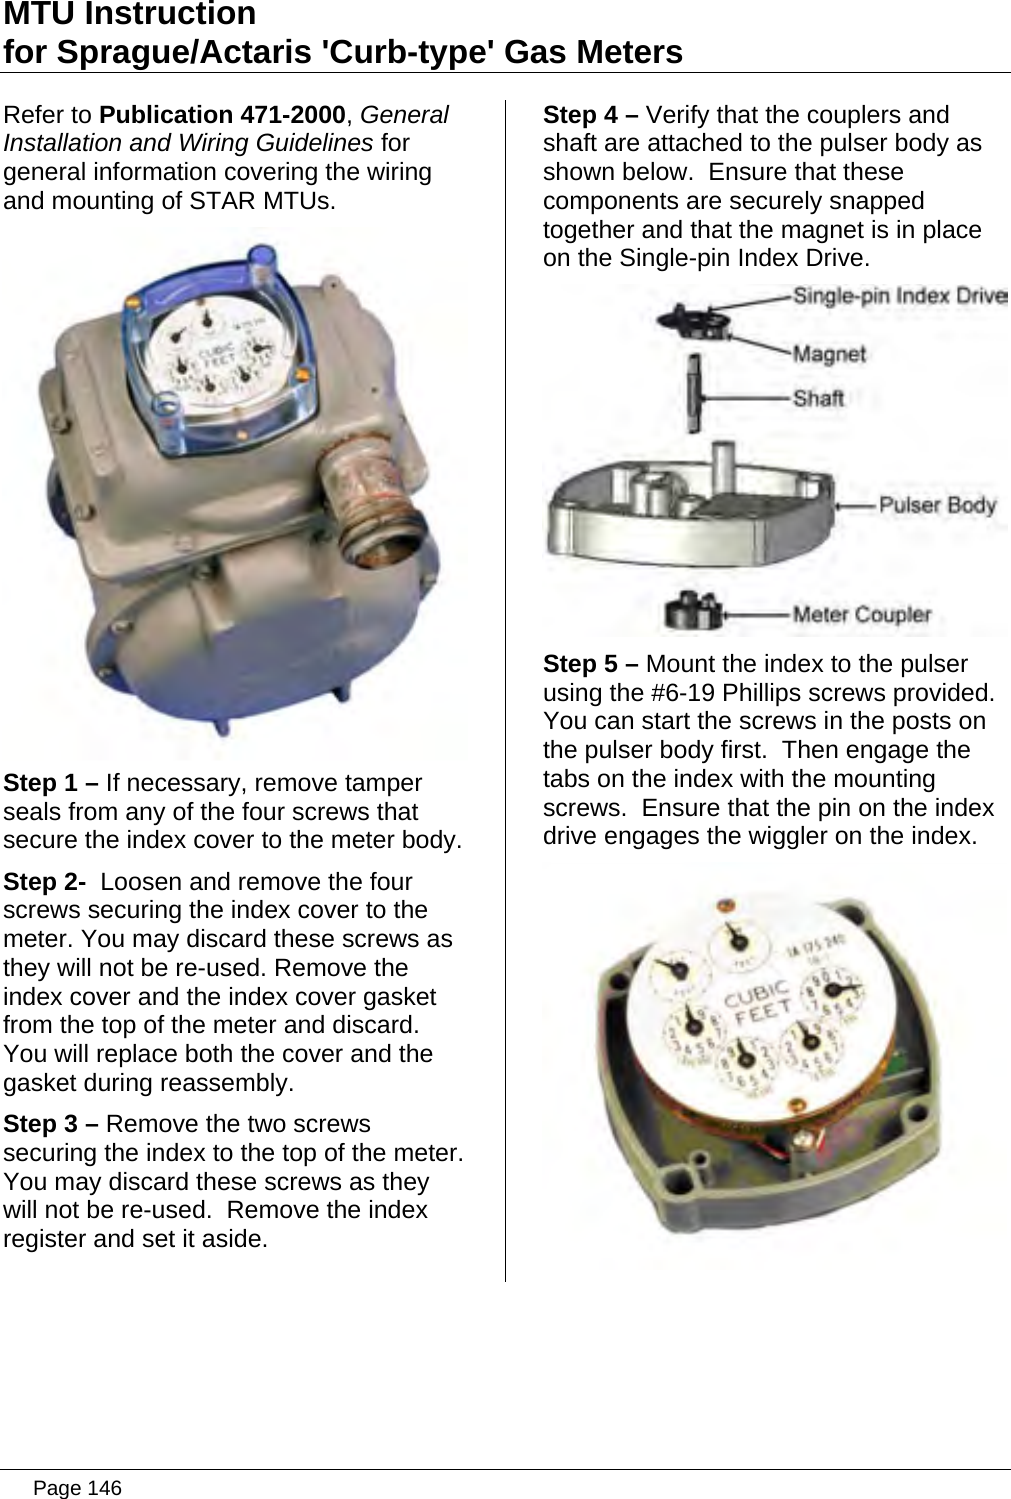 MTU Instruction for Sprague/Actaris &apos;Curb-type&apos; Gas Meters Refer to Publication 471-2000, General Installation and Wiring Guidelines for general information covering the wiring and mounting of STAR MTUs.  Step 1 – If necessary, remove tamper seals from any of the four screws that secure the index cover to the meter body. Step 2-  Loosen and remove the four screws securing the index cover to the meter. You may discard these screws as they will not be re-used. Remove the index cover and the index cover gasket from the top of the meter and discard.  You will replace both the cover and the gasket during reassembly. Step 3 – Remove the two screws securing the index to the top of the meter.  You may discard these screws as they will not be re-used.  Remove the index register and set it aside. Step 4 – Verify that the couplers and shaft are attached to the pulser body as shown below.  Ensure that these components are securely snapped together and that the magnet is in place on the Single-pin Index Drive.  Step 5 – Mount the index to the pulser using the #6-19 Phillips screws provided. You can start the screws in the posts on the pulser body first.  Then engage the tabs on the index with the mounting screws.  Ensure that the pin on the index drive engages the wiggler on the index.    Page 146